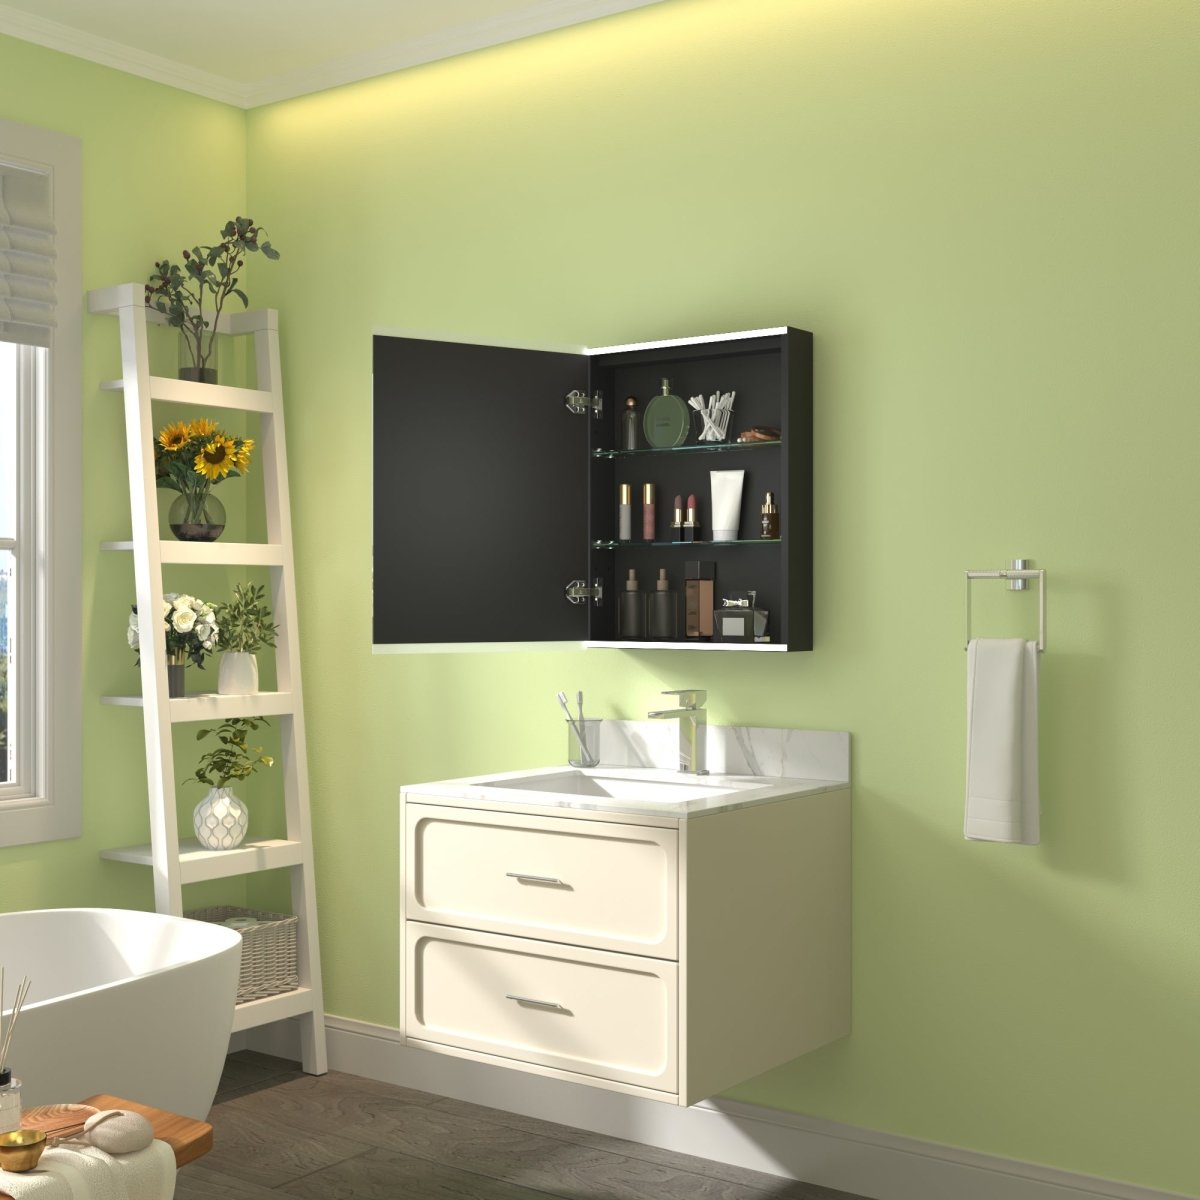 Classic 20" W x 26" H LED Bathroom Light Medicine Cabinet with Mirrors Left Side - ExBriteUSA